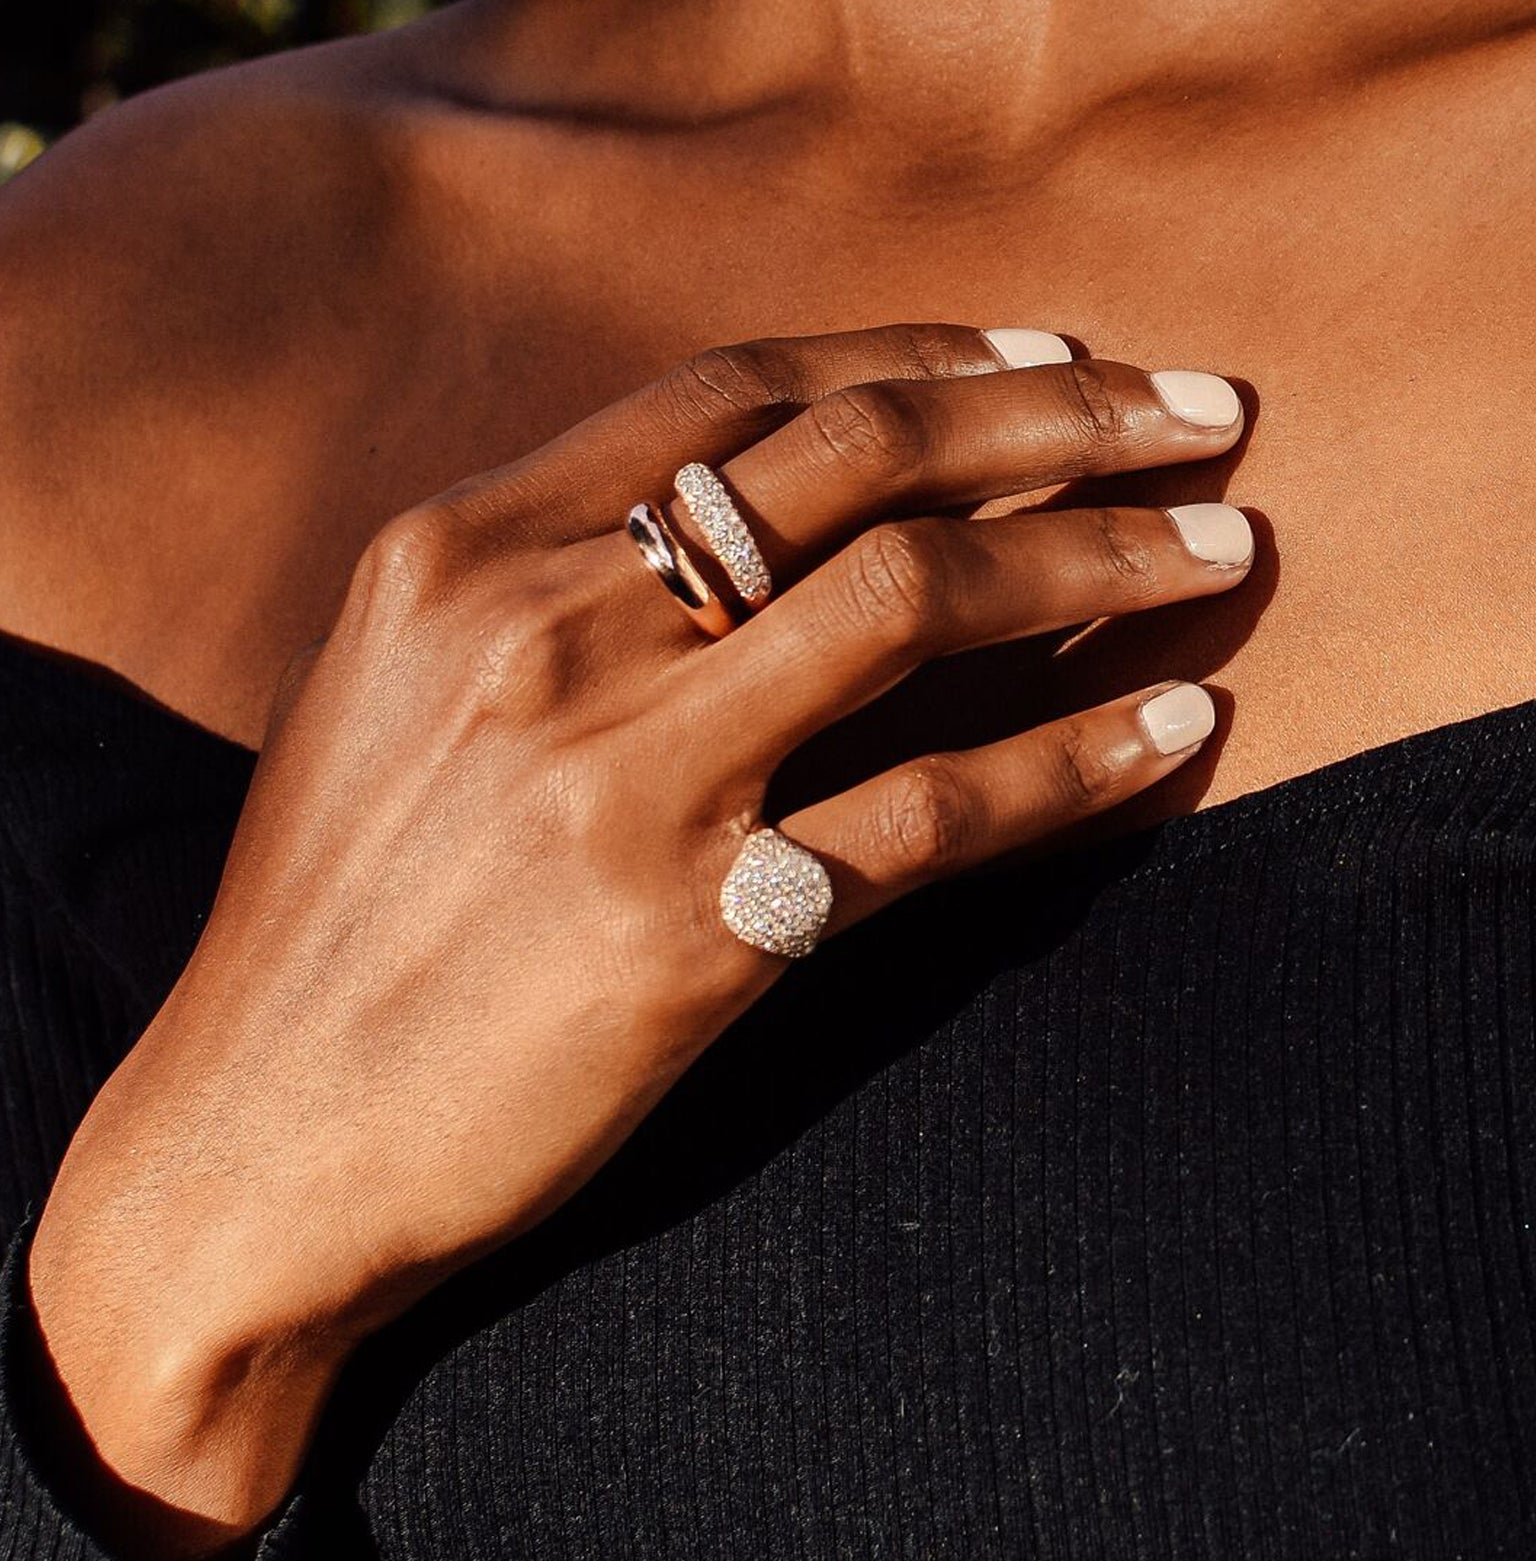 Here, the Bling Ring is shown with the beautiful Gemini Ring.